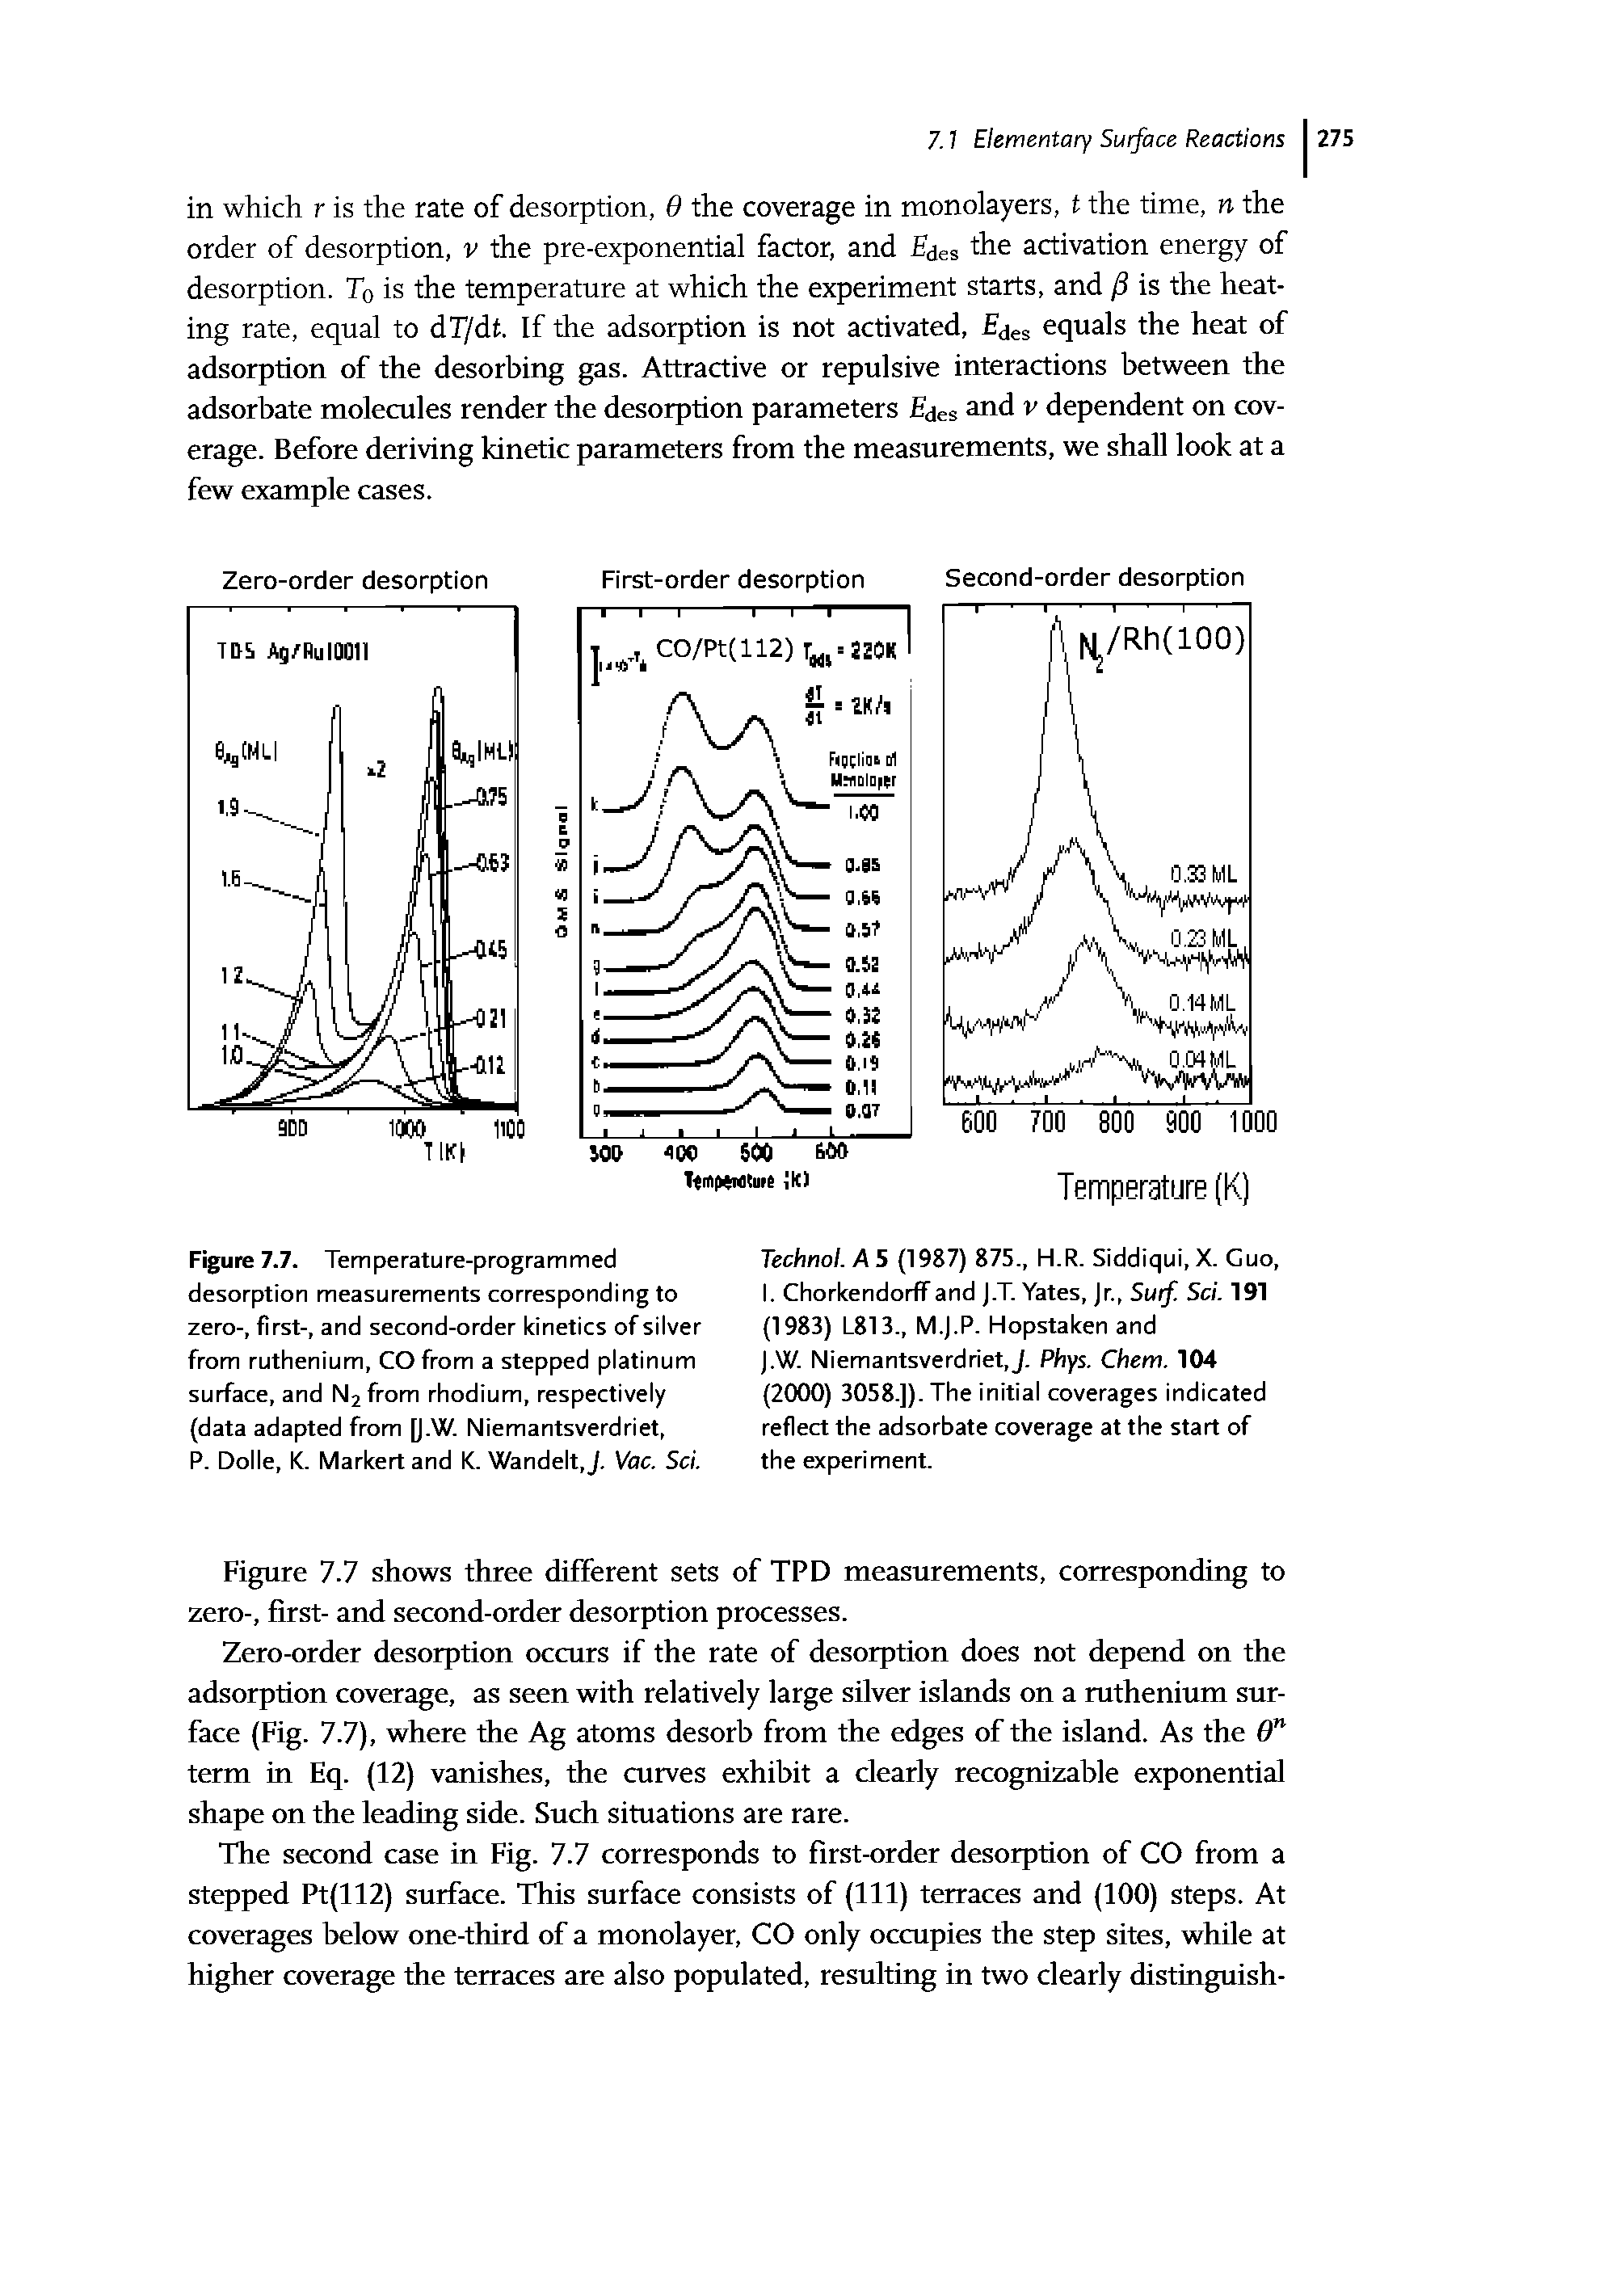 Figure 7.7. Temperature-programmed desorption measurements corresponding to zero-, first-, and second-order kinetics of silver from ruthenium, CO from a stepped platinum surface, and N2from rhodium, respectively (data adapted from [J.W. Niemantsverdriet,...